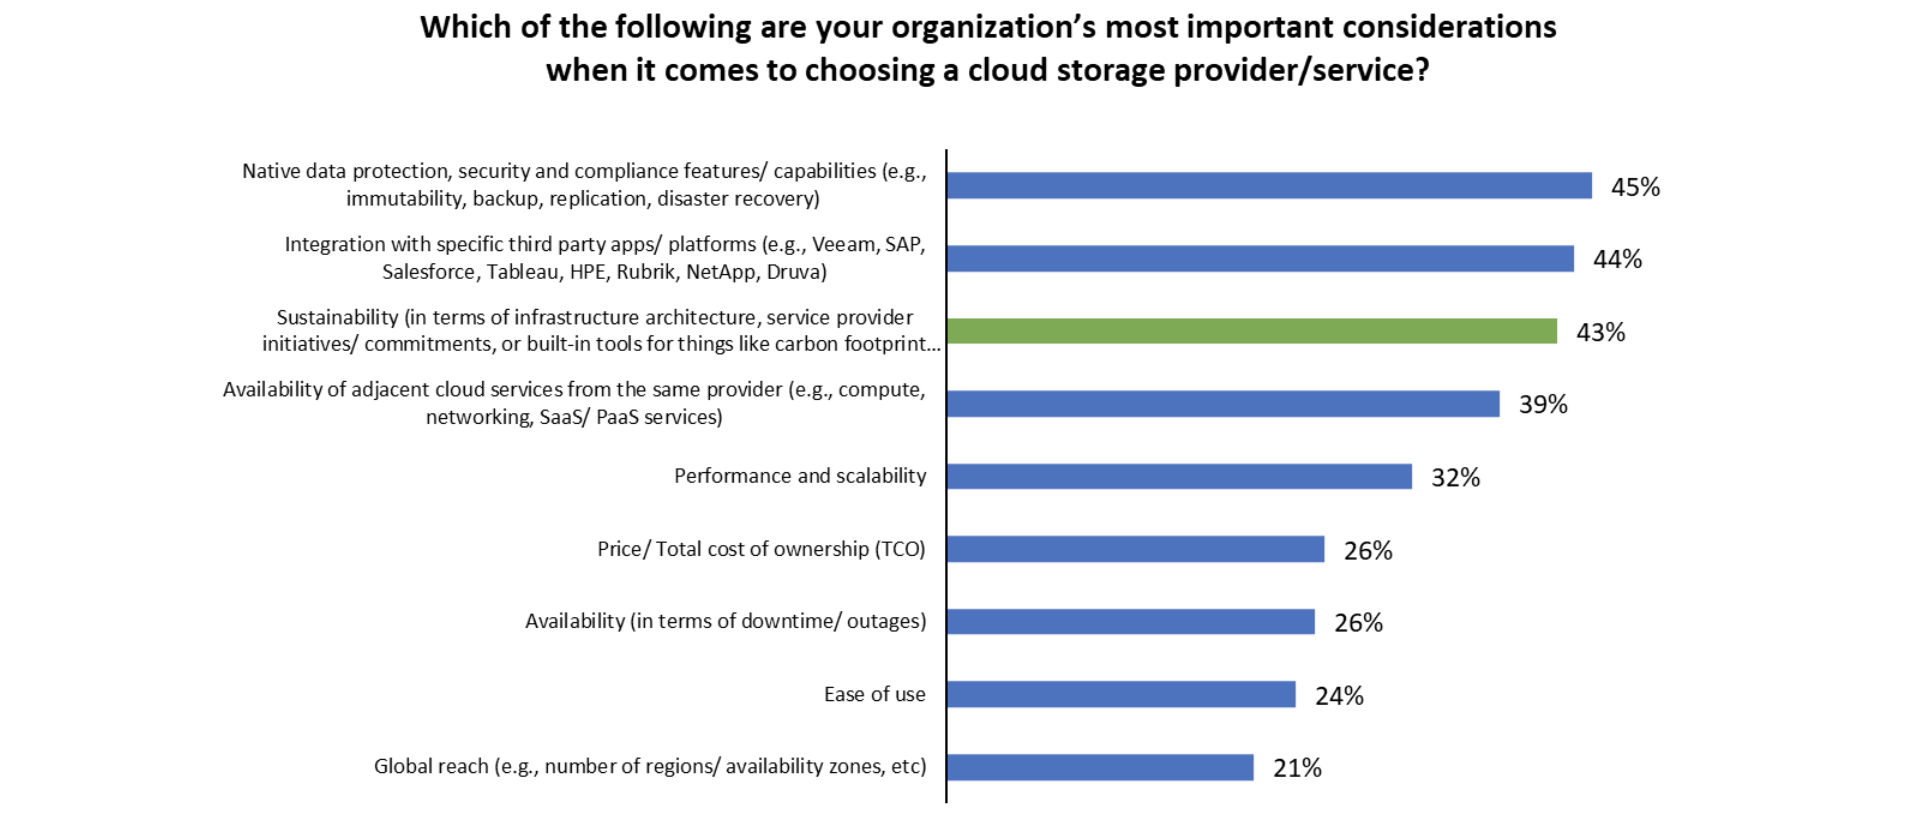 Respondents rank sustainability as a top consideration when considering cloud storage service providers.